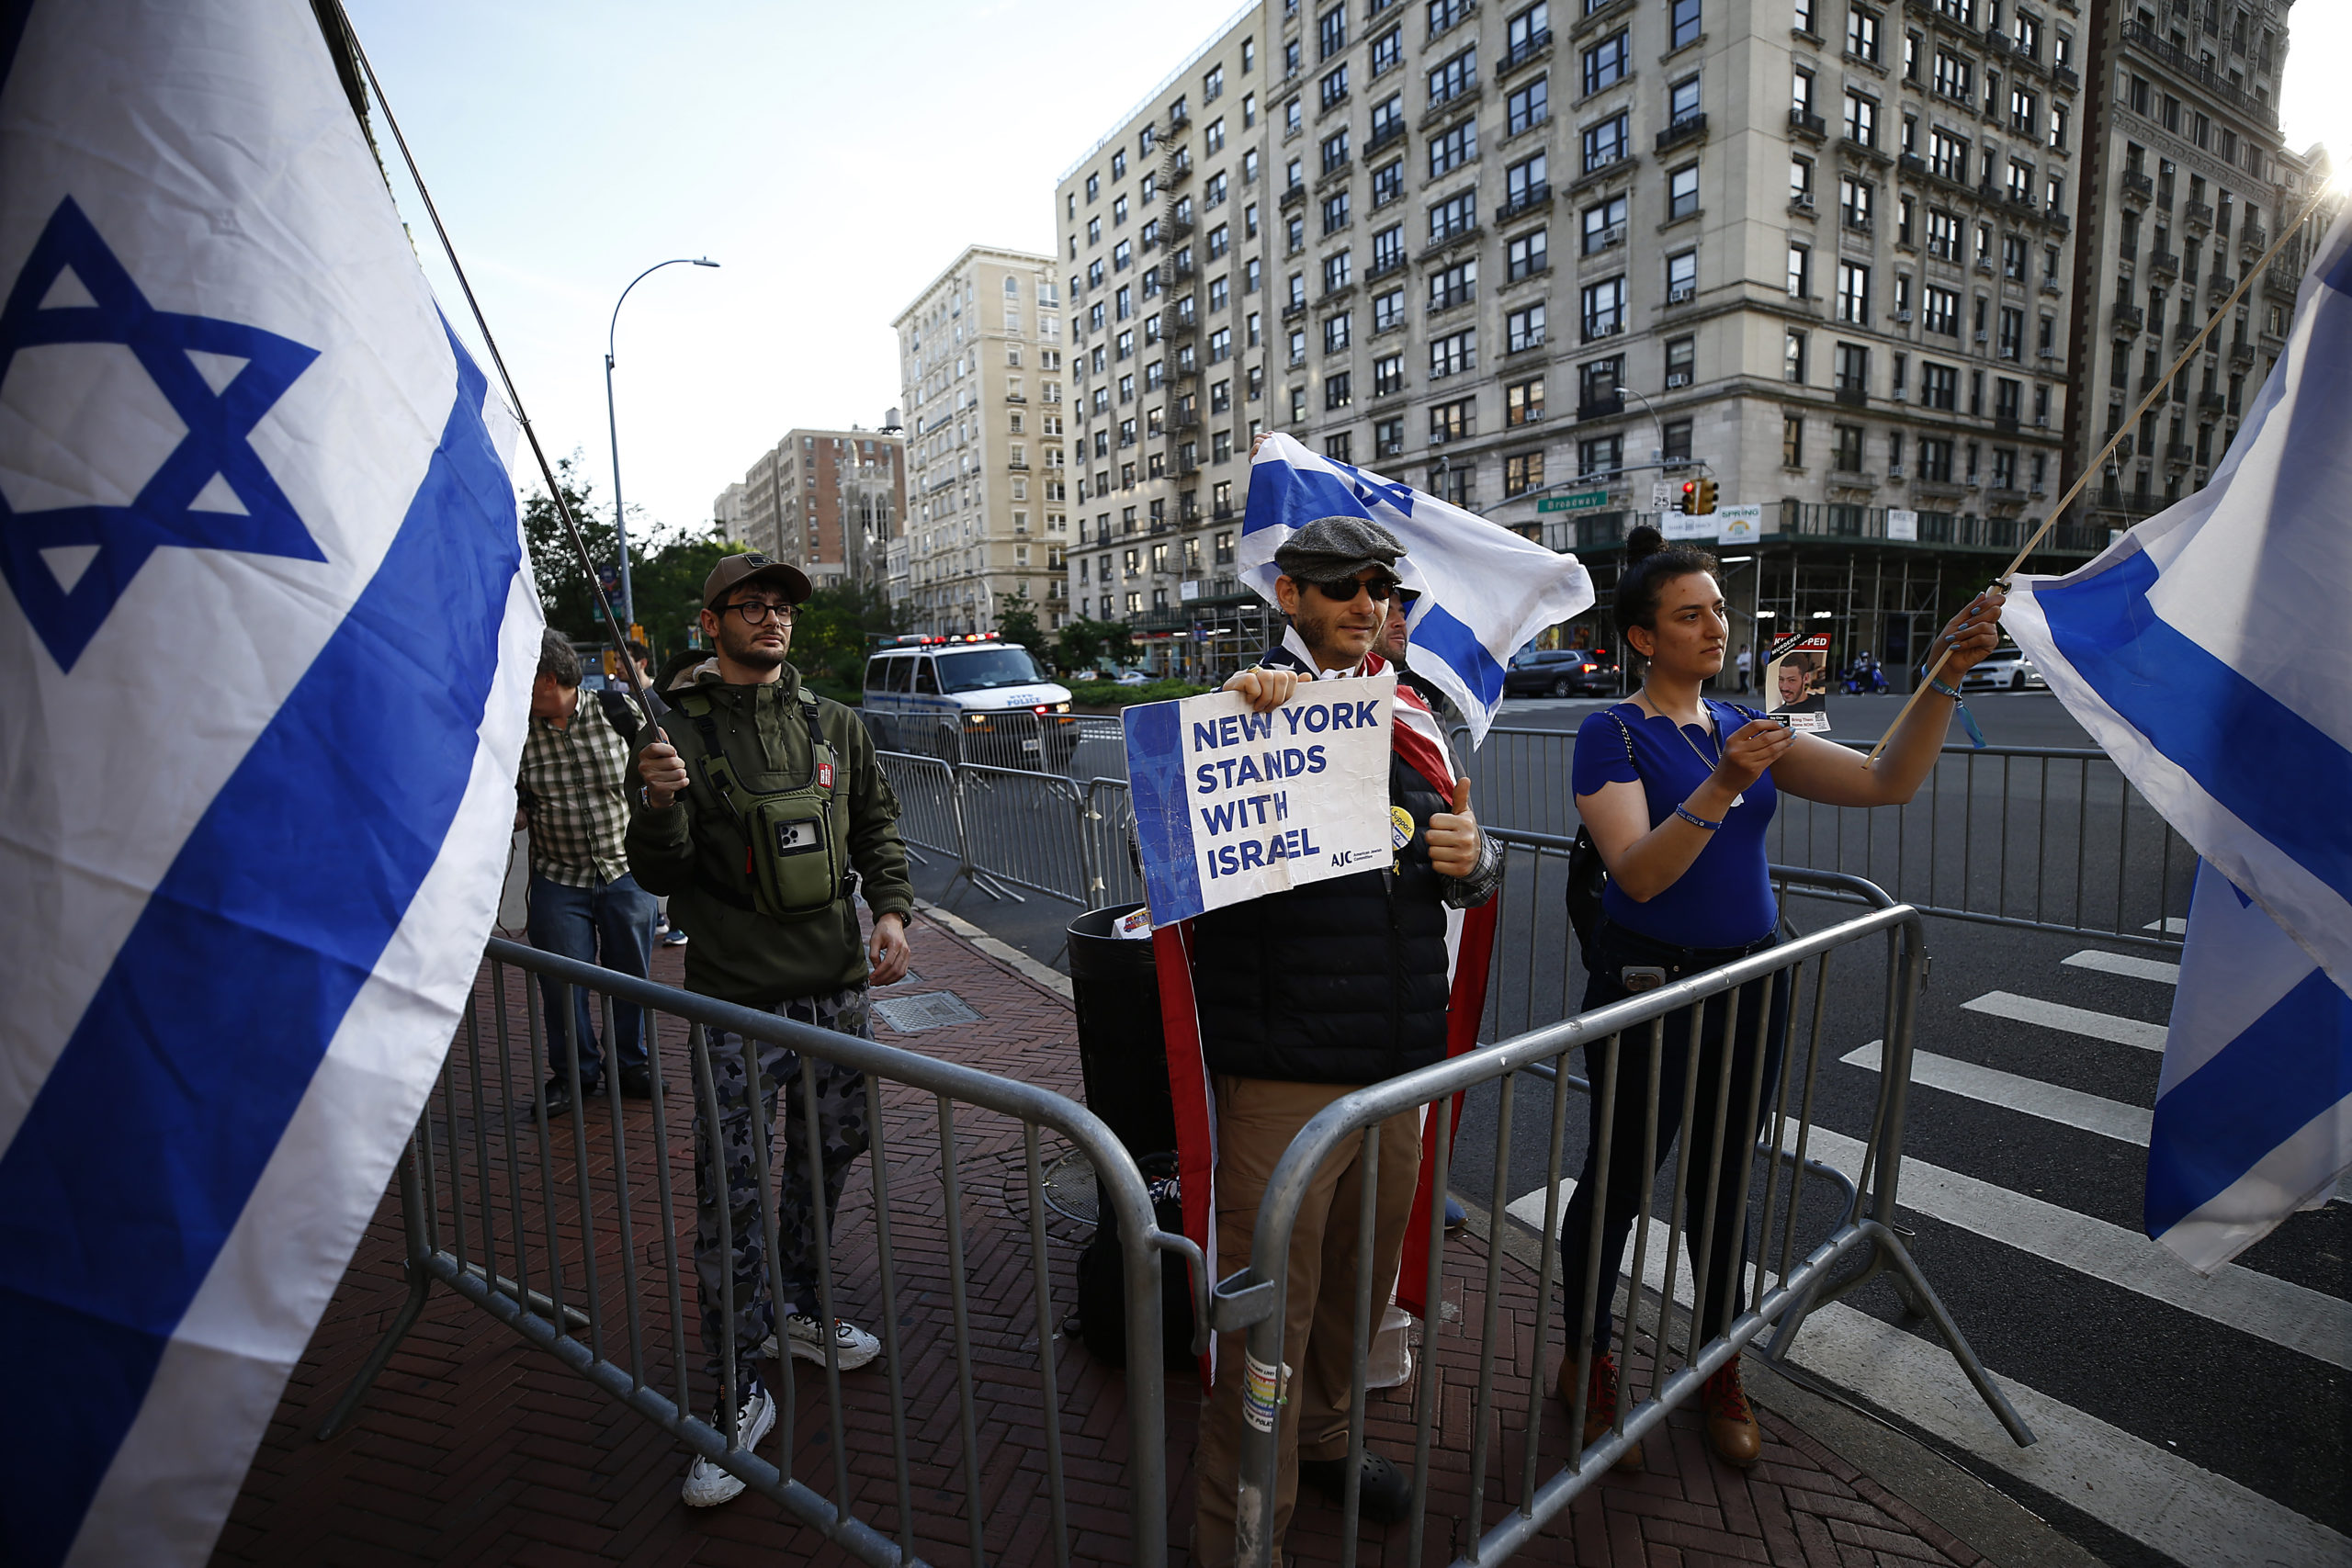 NEW YORK, NEW YORK - MAY 23: Israeli counter-protesters demonstrate during a pro-Palestinian rally near Columbia University on May 23, 2024 in New York City. Demonstrators gathered to protest against New York Mayor Eric Adams’s association with wealthy business owners and investors calling for they city's student protest encampments to be disbanded. Several of New York's prominent business owners reportedly offered political donations to Mayor Adams in an effort to influence public opinion towards Israel, while others suggested payments for private investigators to aid the NYPD in handling the student protesters, according to a Washington Post investigation of conversations made via on-line chats. According to City Hall, the NYPD did not use any donations in their handling of the protesters. (Photo by John Lamparski/Getty Images)